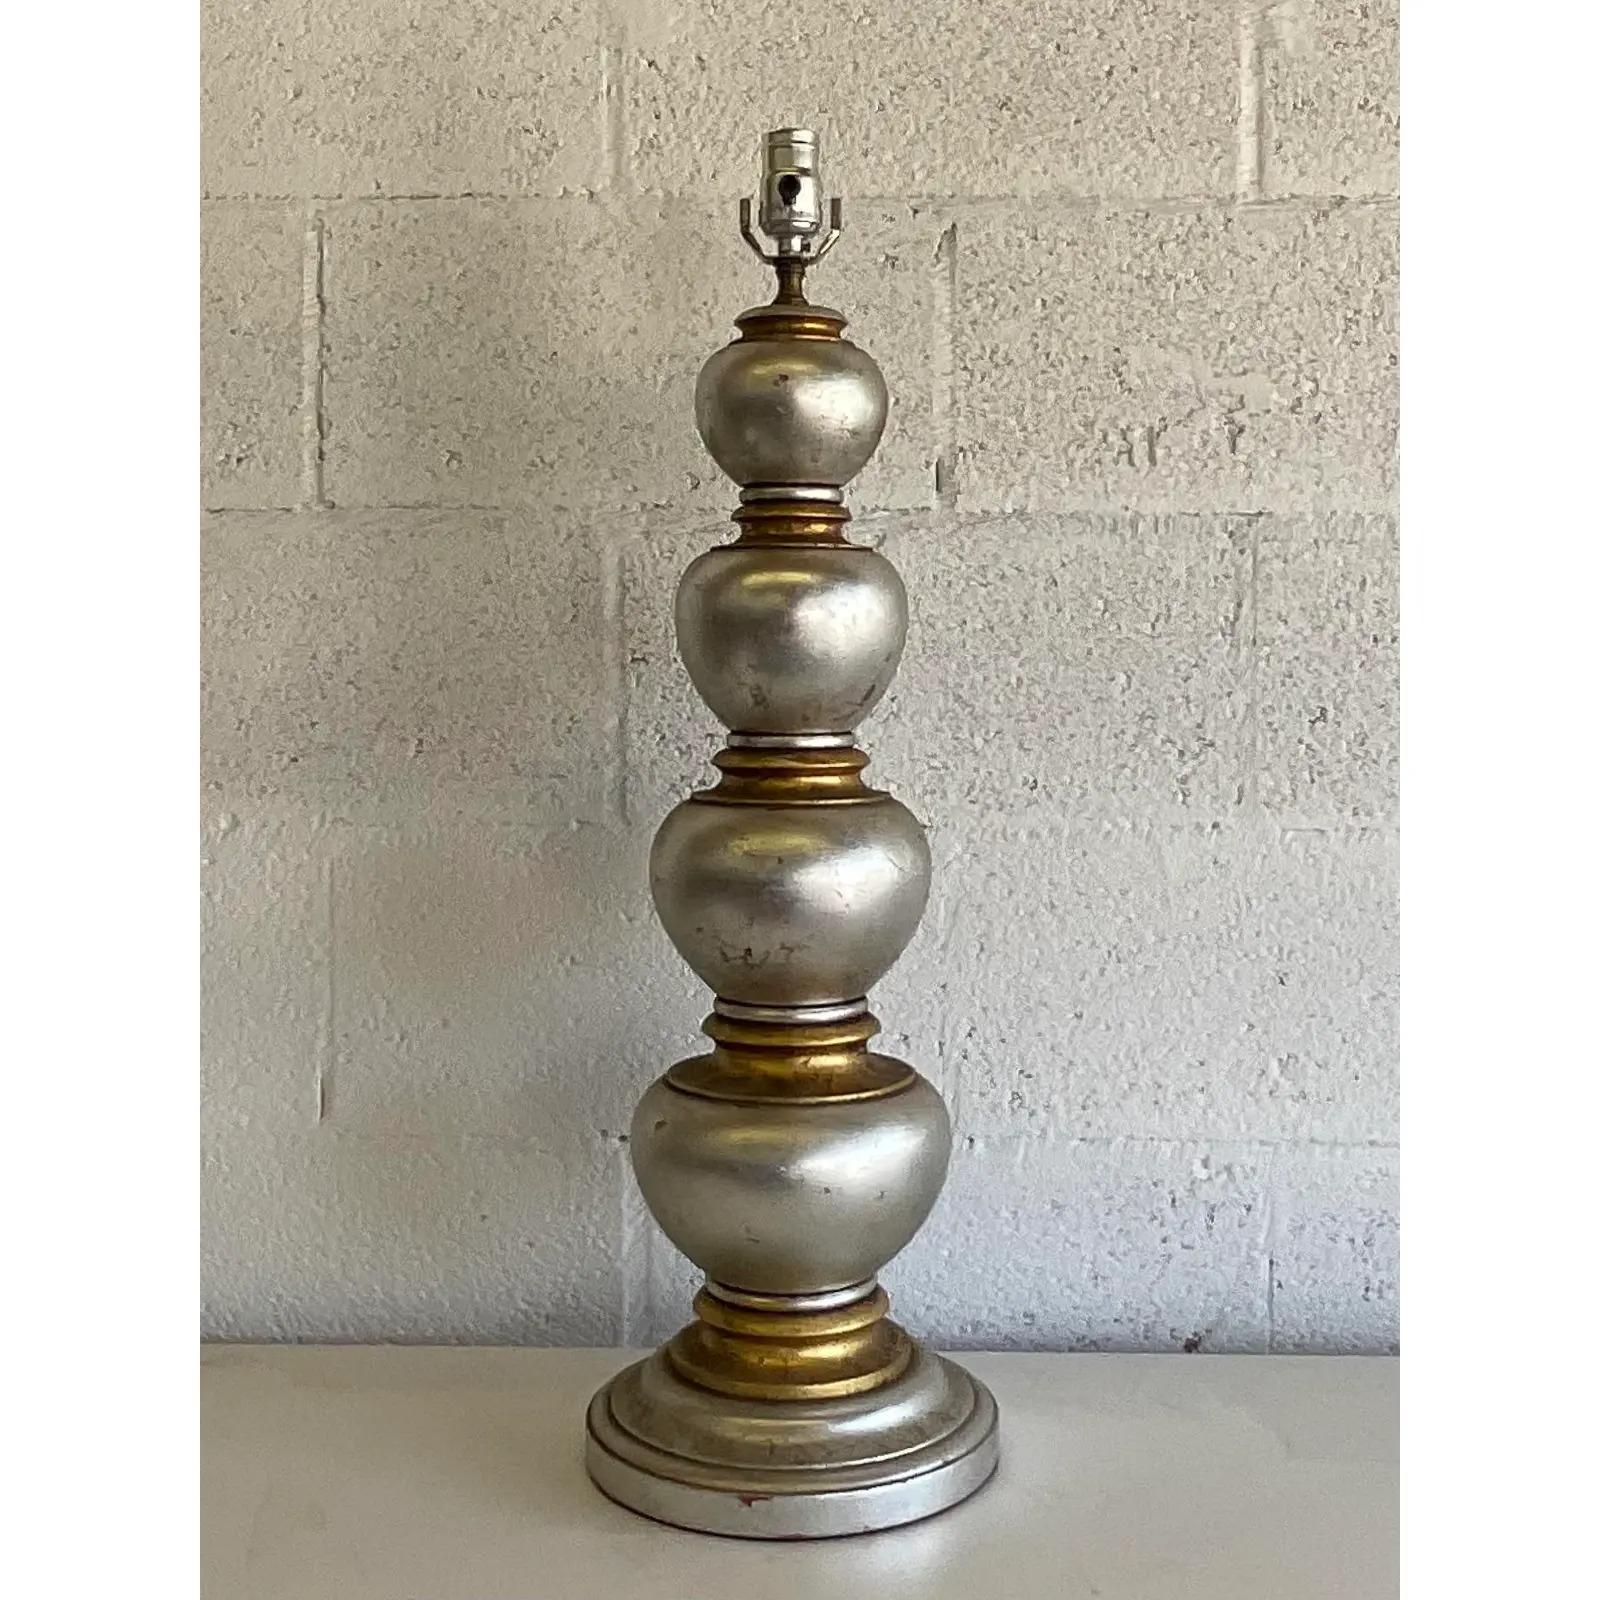 Stunning vintage Regency table lamp. Beautiful turned wood lamp with a brilliant silver leaf and gilt finish. Done in the manner of James Mont. Large and impressive. Acquired from a Palm Beach estate.